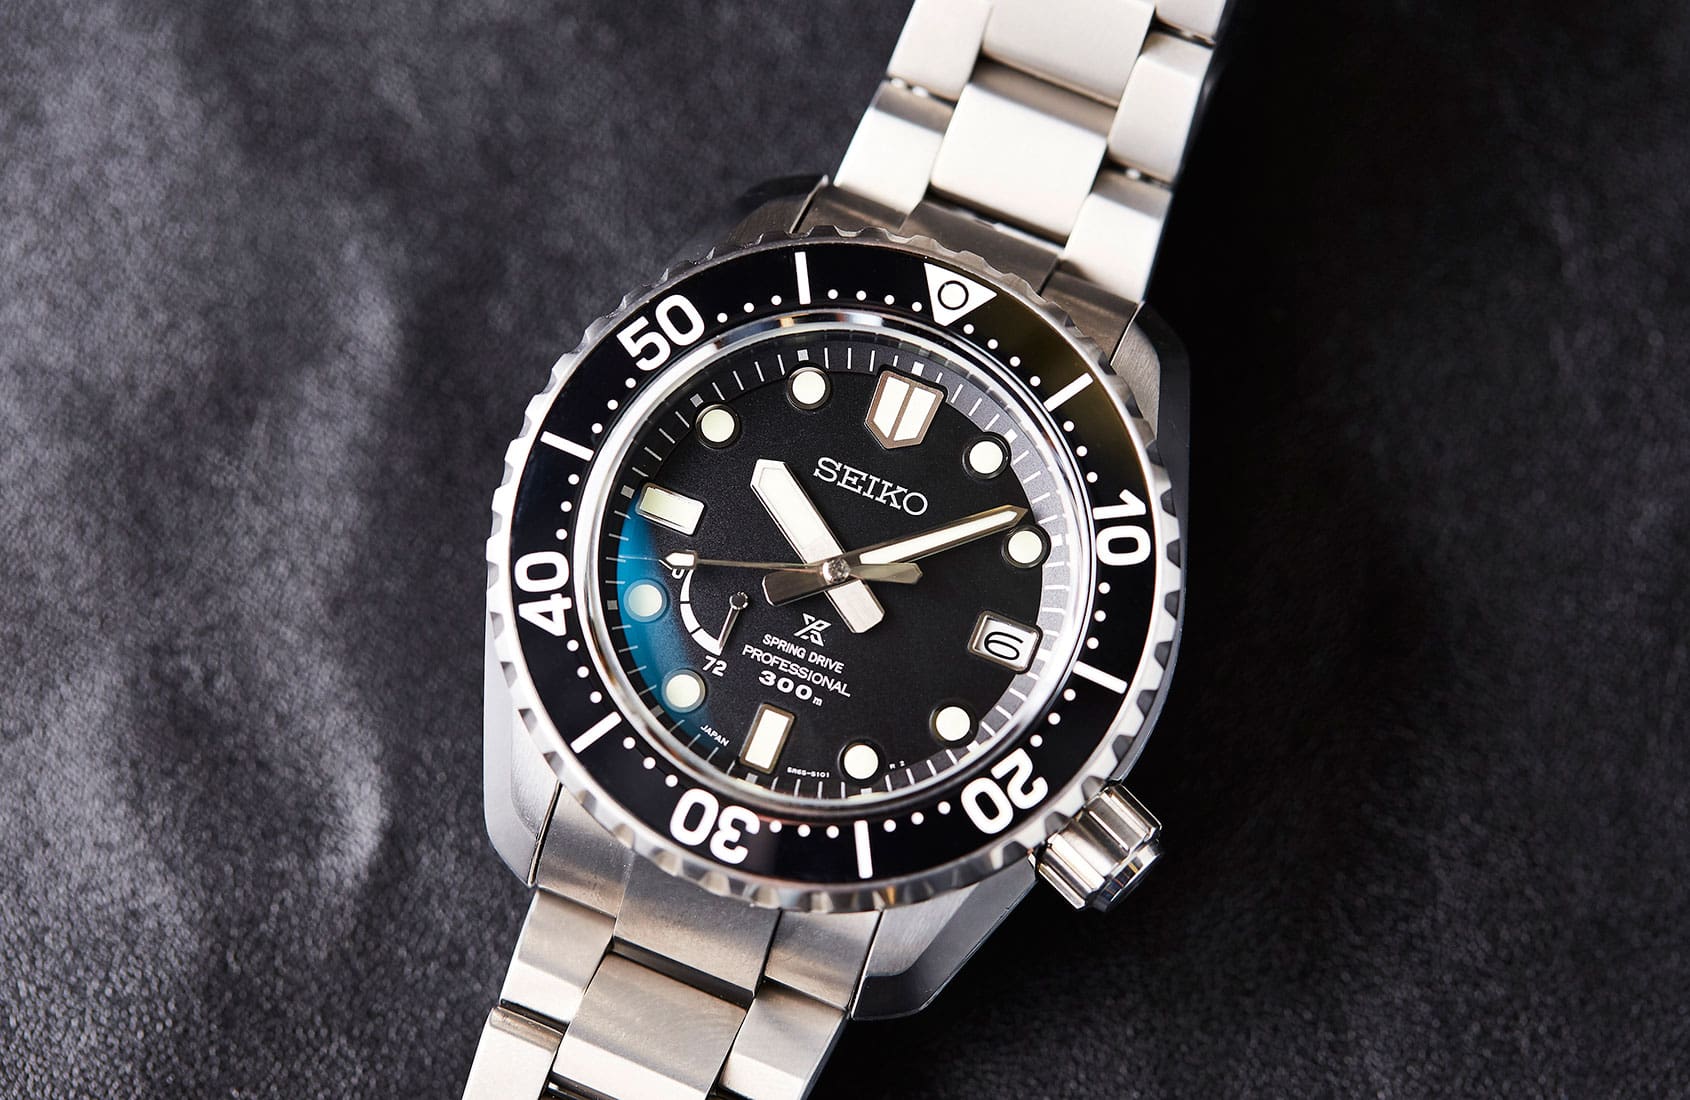 Seiko’s Prospex LX Line Diver emerges from GPHG as a winner